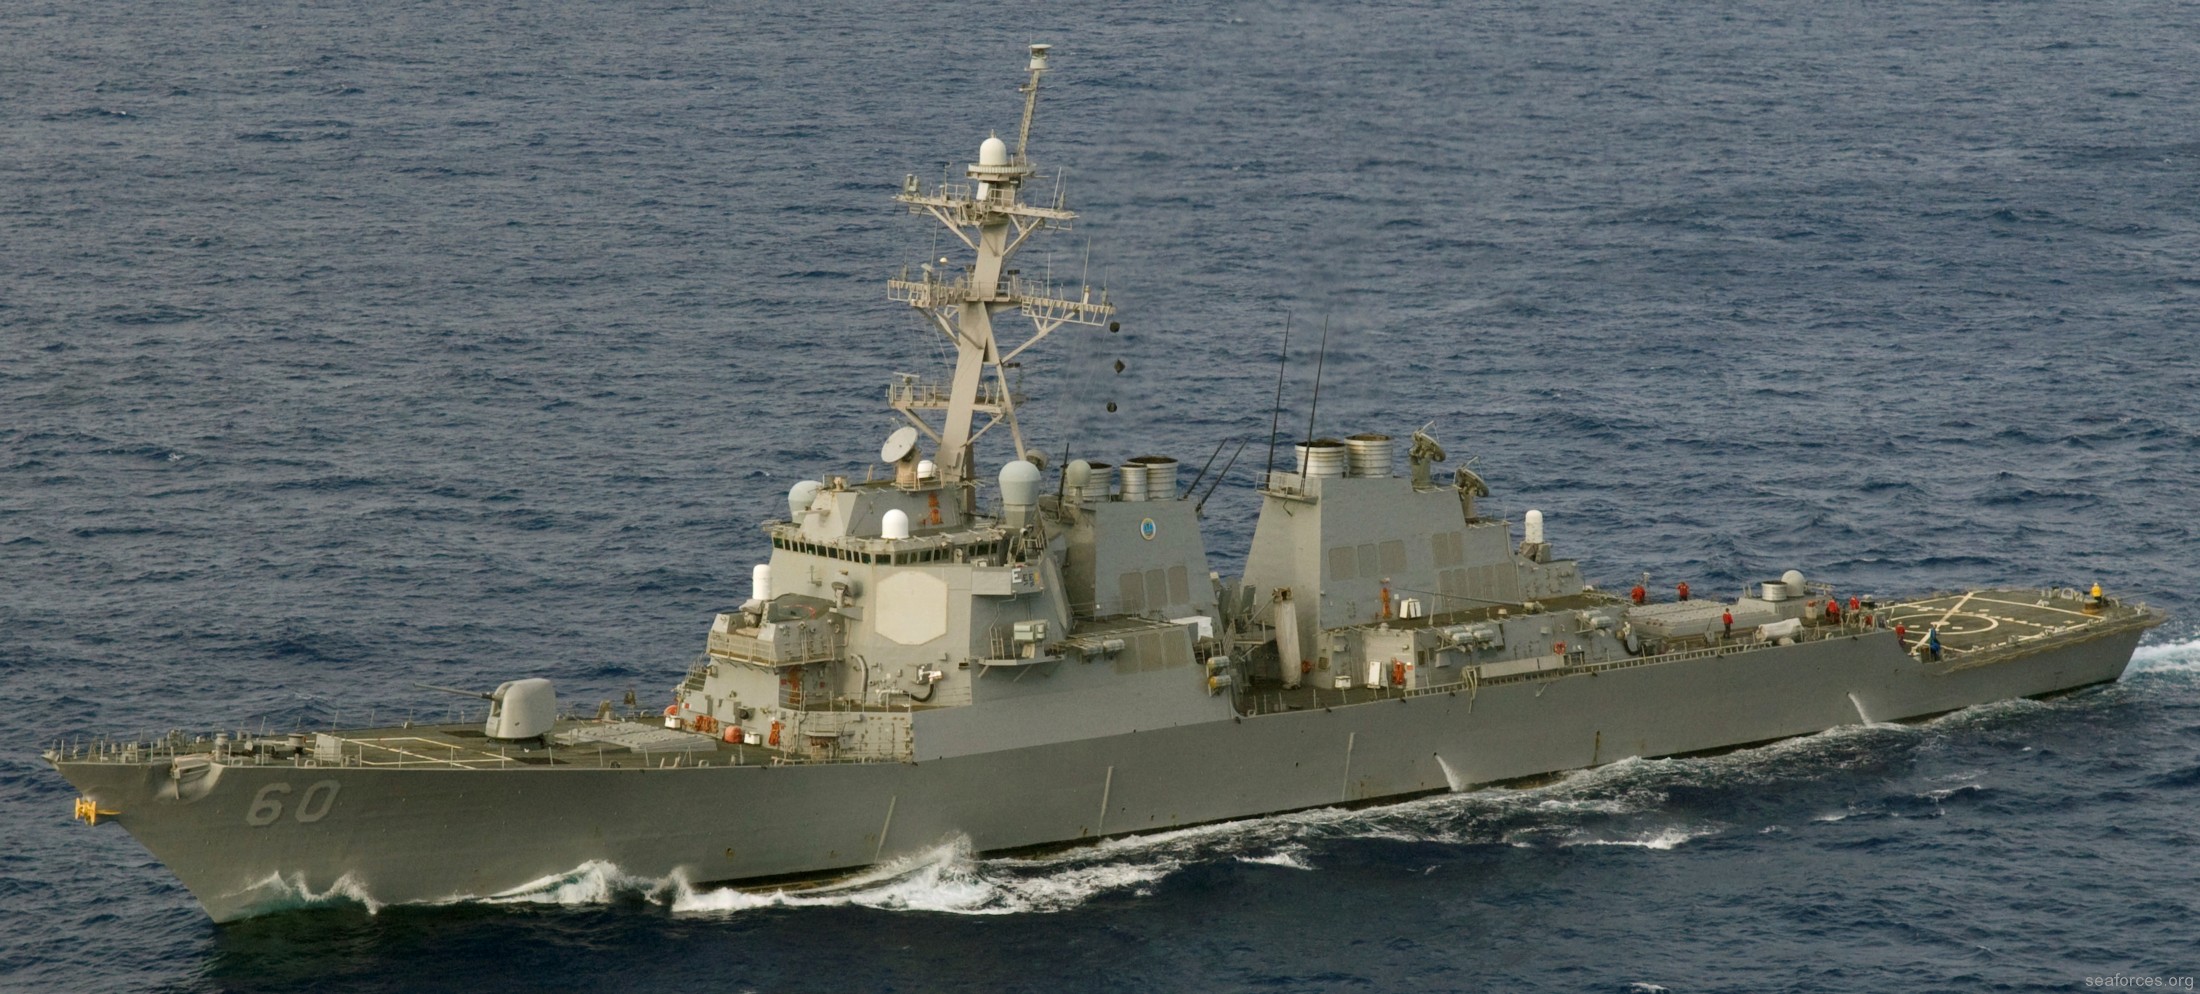 ddg-60 uss paul hamilton guided missile destroyer us navy 29